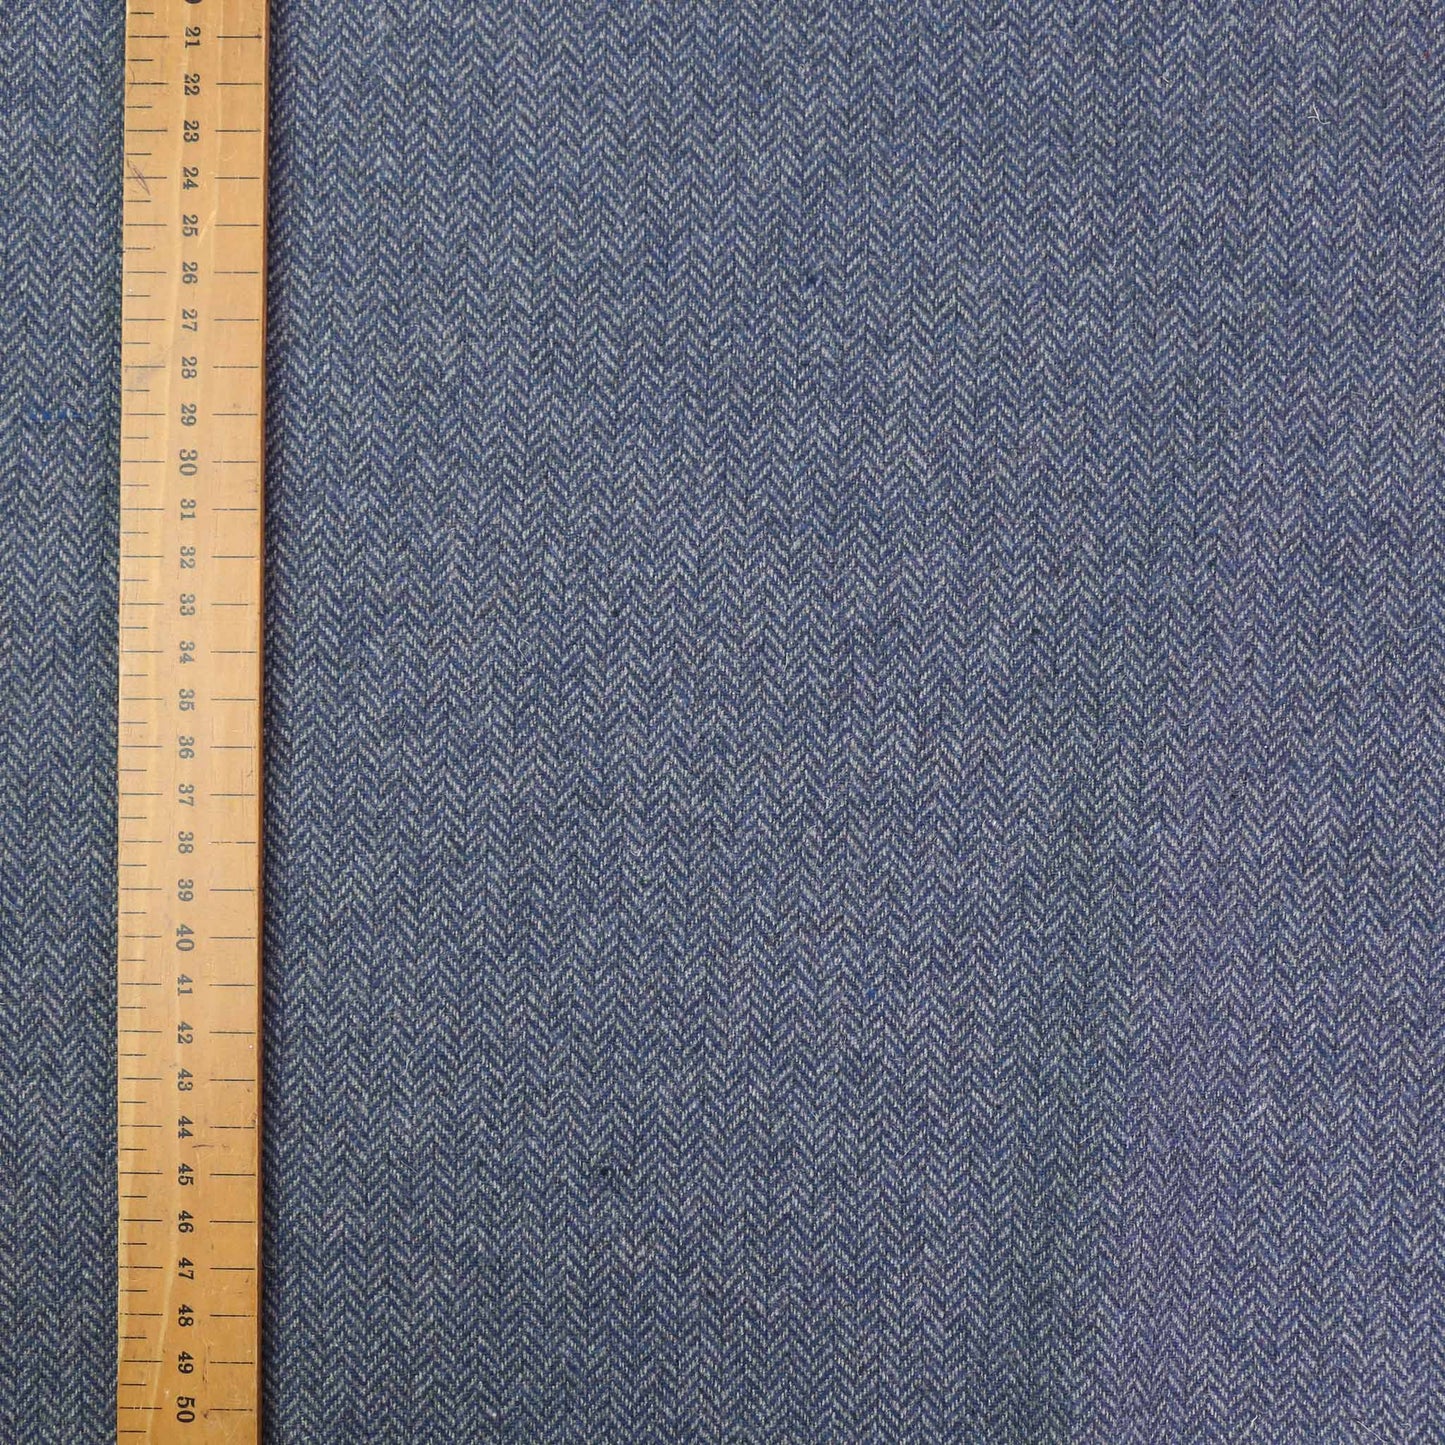 Wool blend suiting -  Blue